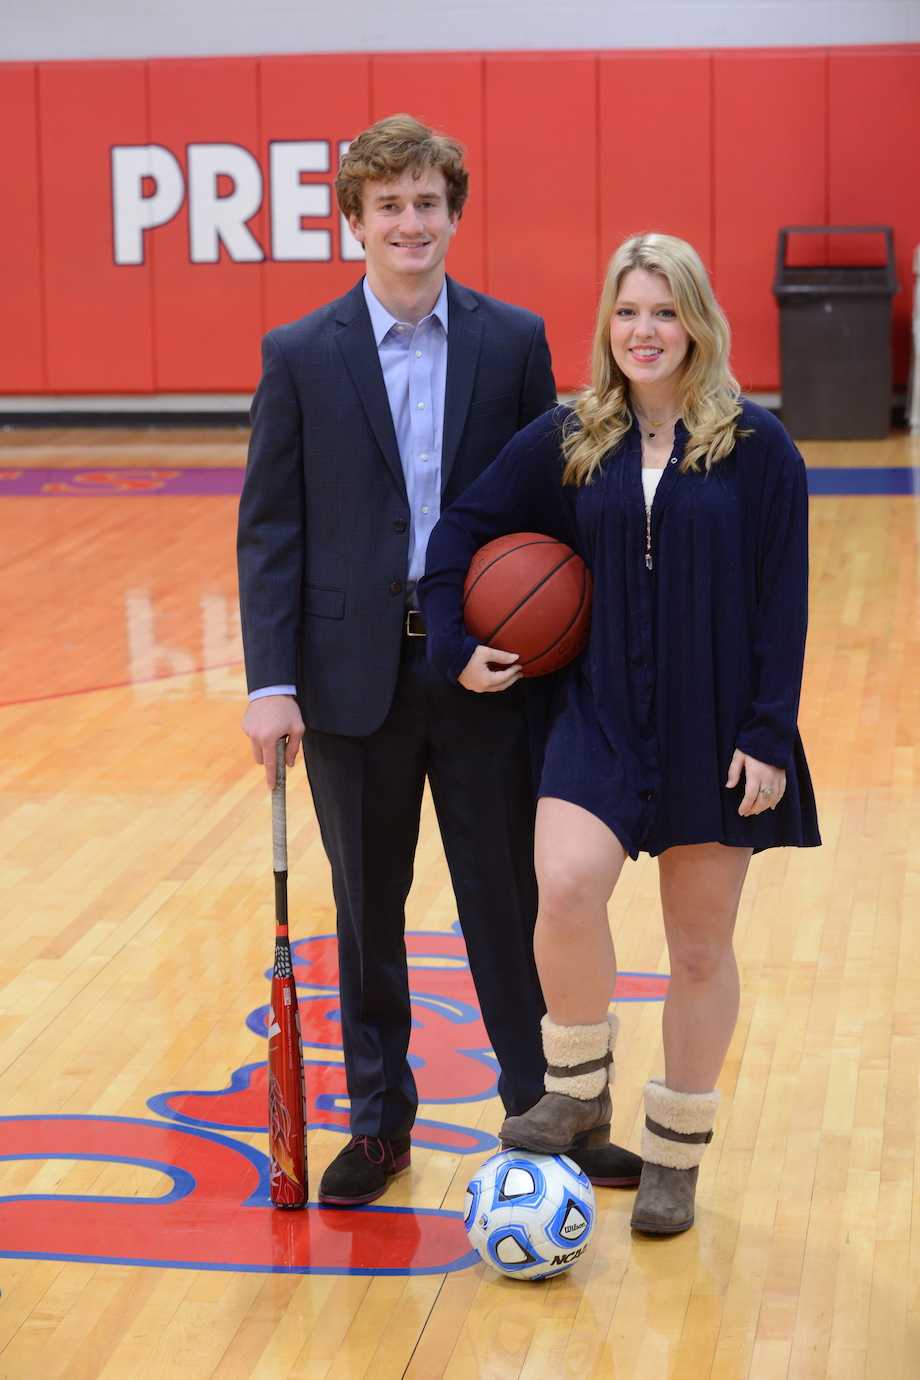 Most Athletic: Gene Wood and Kathryn Bickerstaff (photo courtesy of Mr. Hubert Worley)